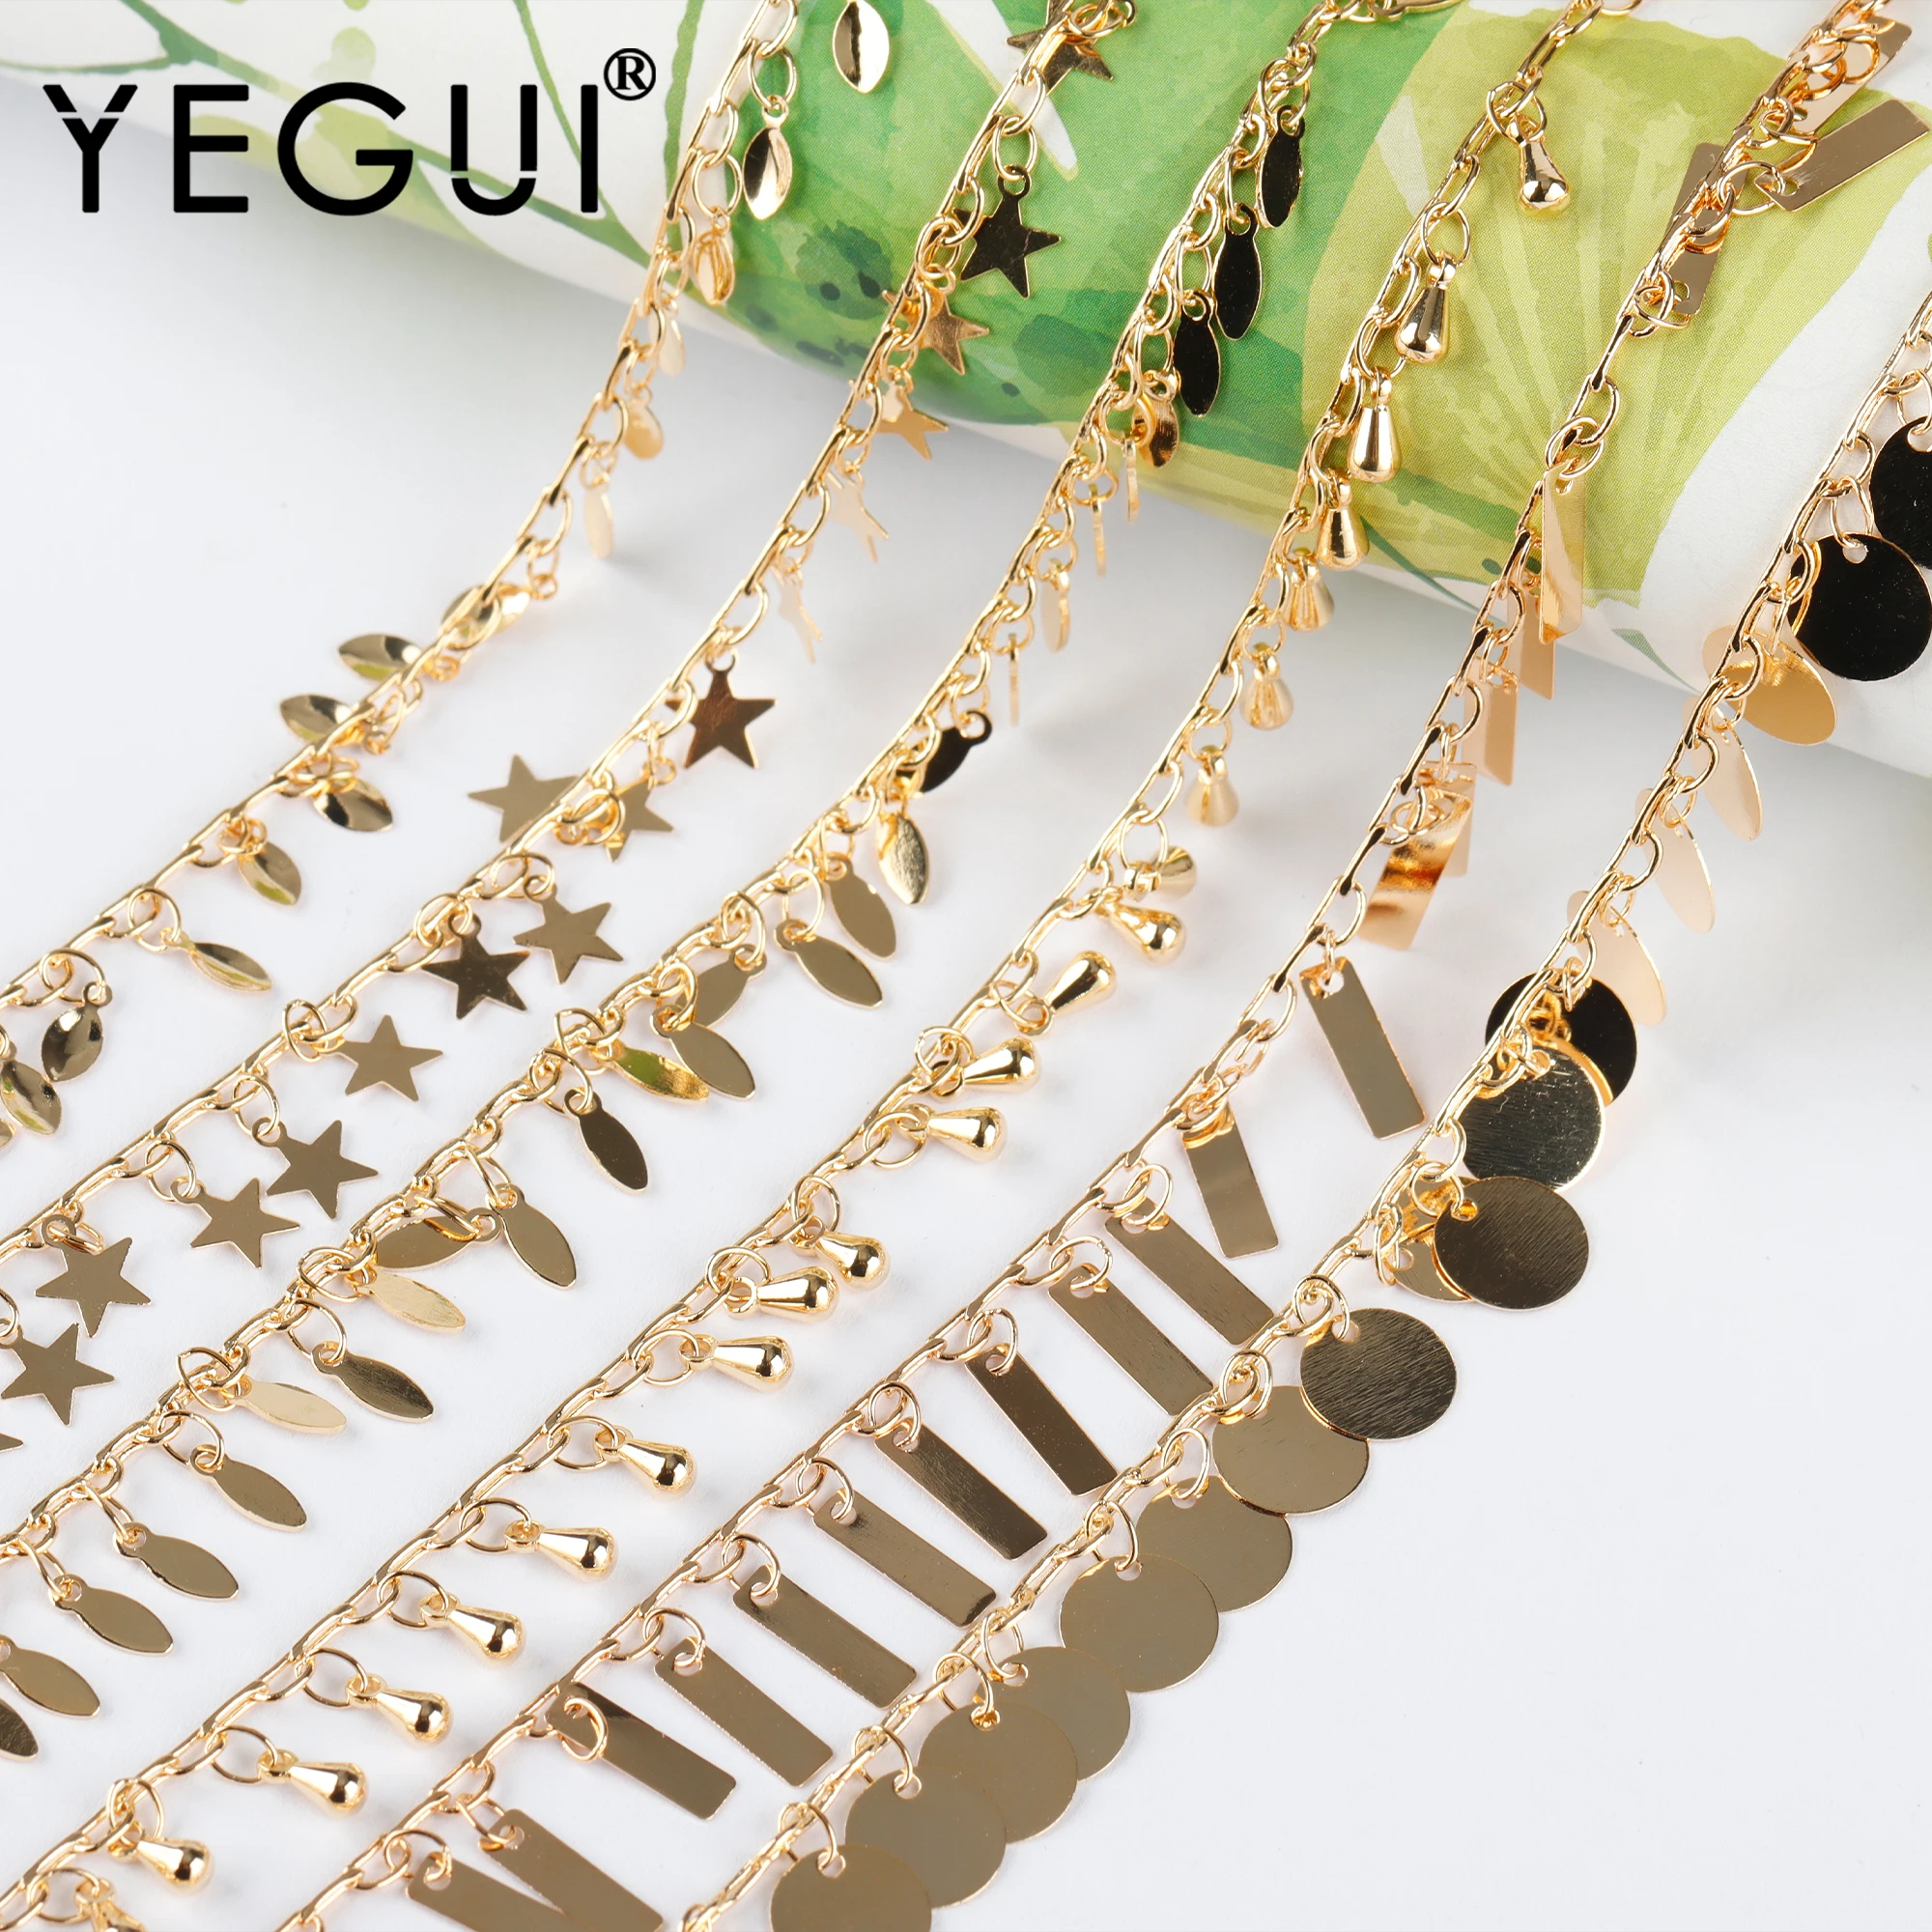 

YEGUI C197,diy chain,18k gold plated,0.3microns,copper metal,hand made chain,charms,diy bracelet necklace,jewelry making,1m/lot